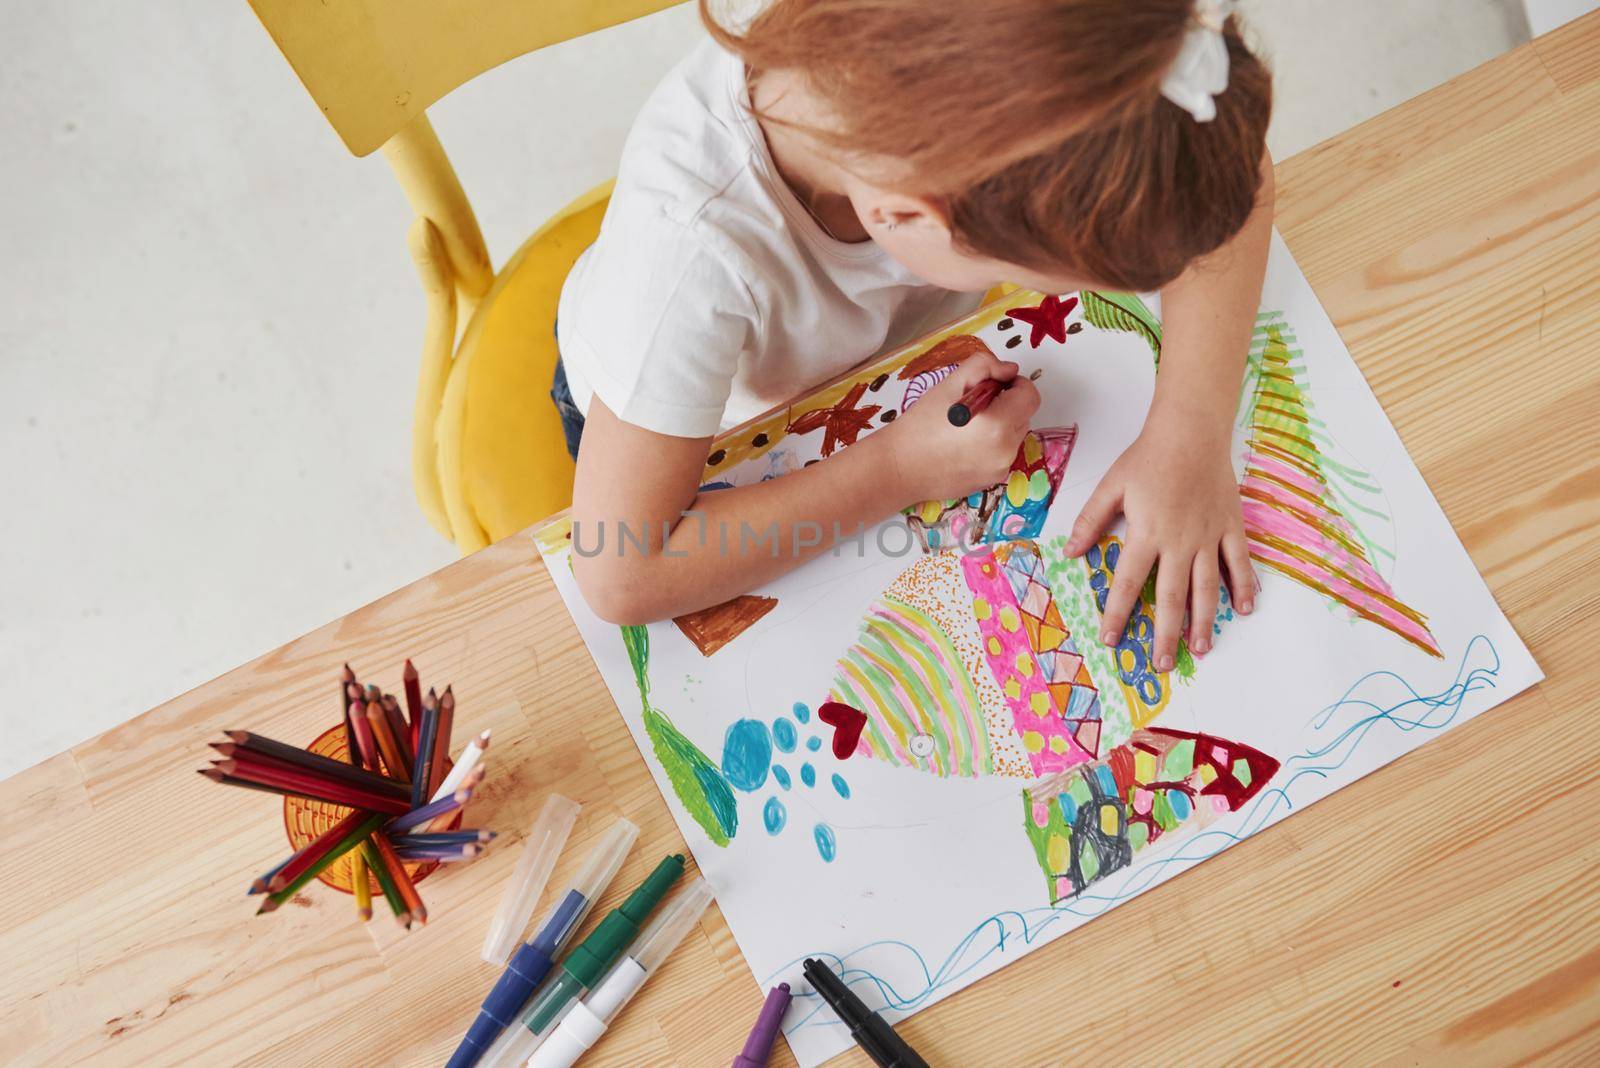 She loves that occupation. Cute little girl in art school draws her first paintings by pencils and markers.